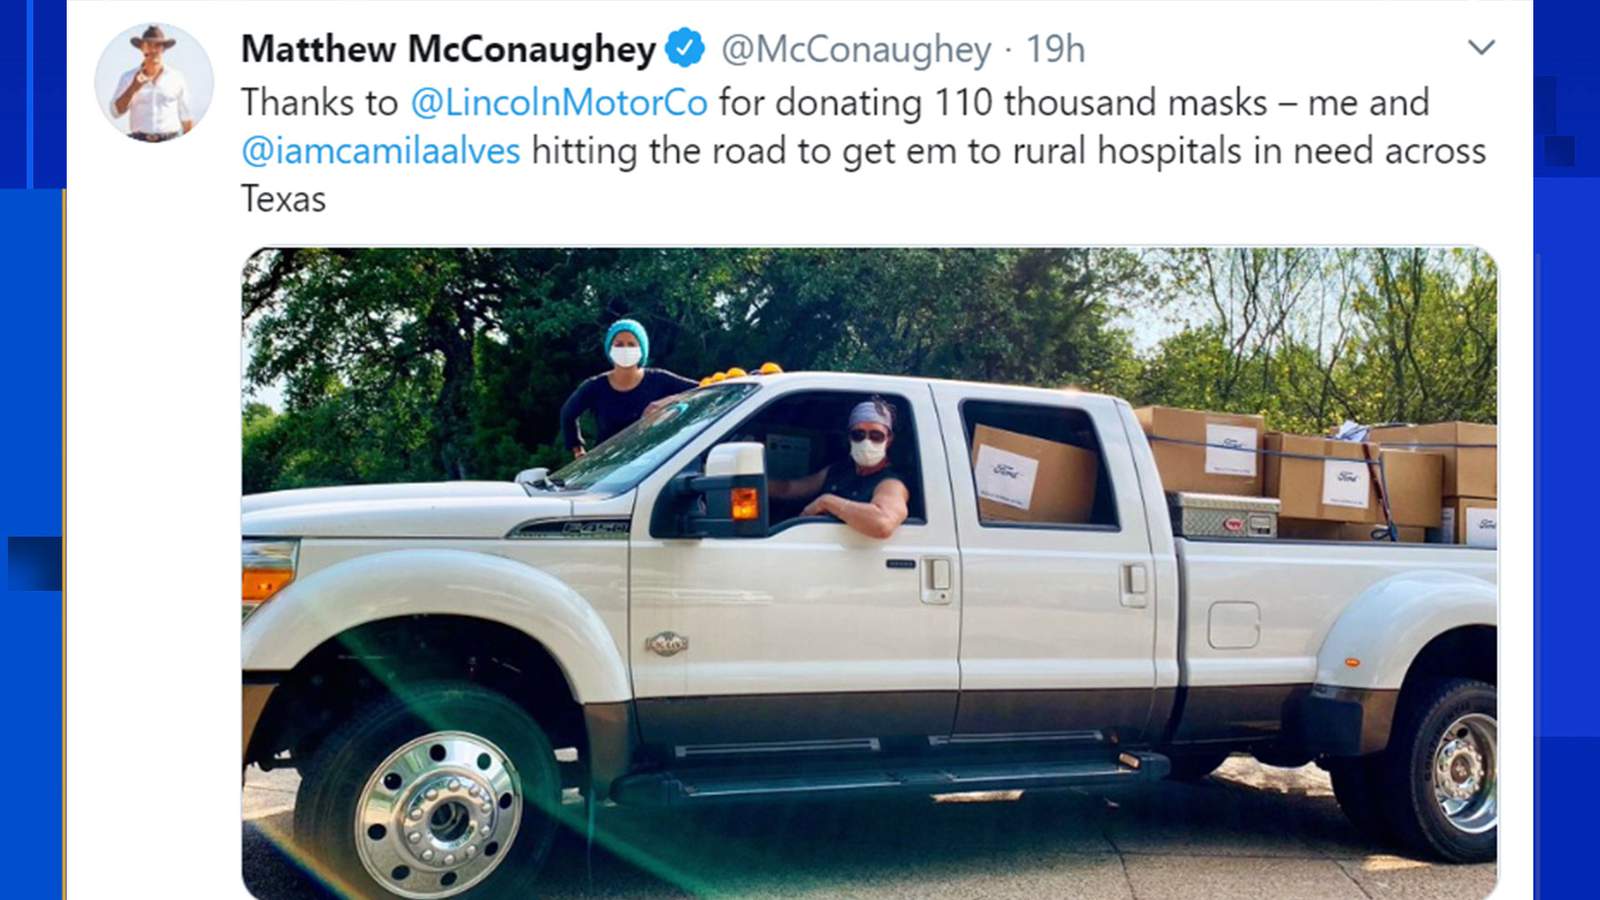 Matthew McConaughey is delivering 110,000 masks to rural Texas hospitals